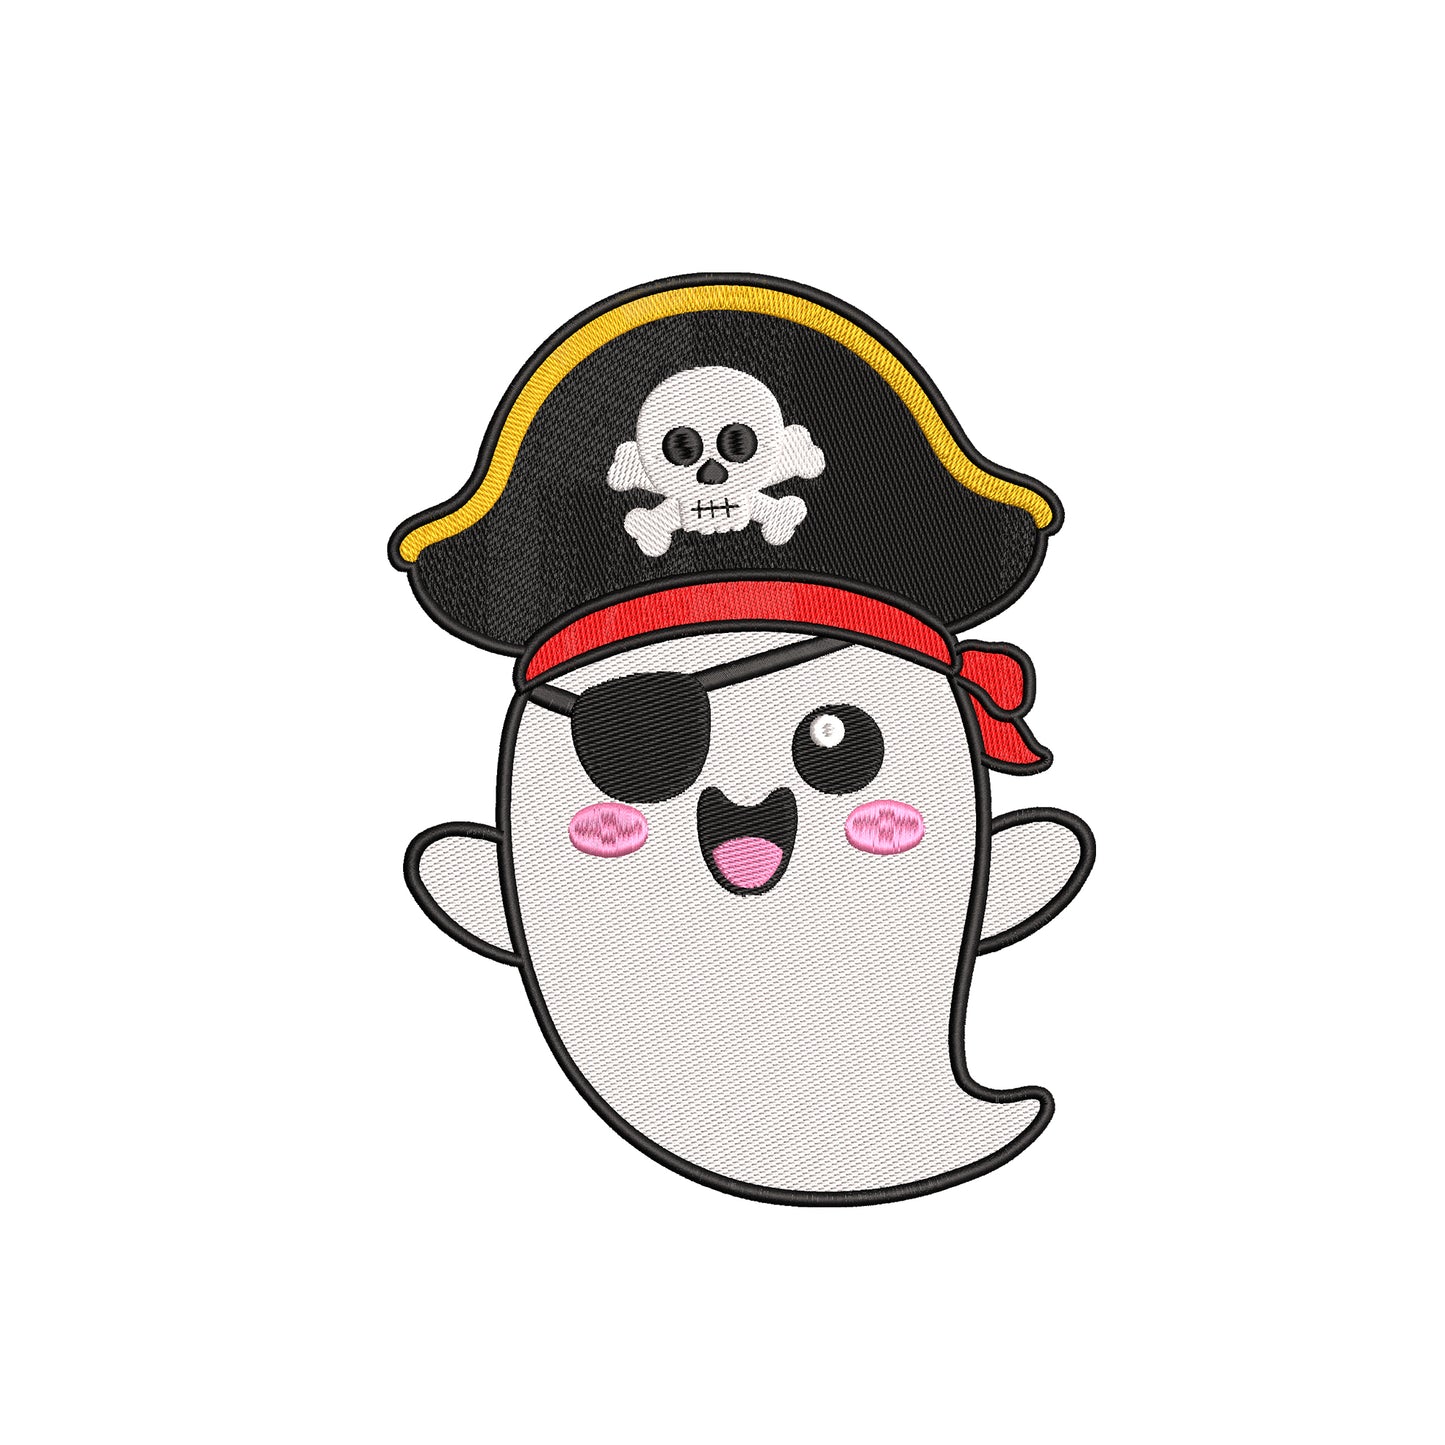 Pirate ghost embroidery designs Halloween - 28042406